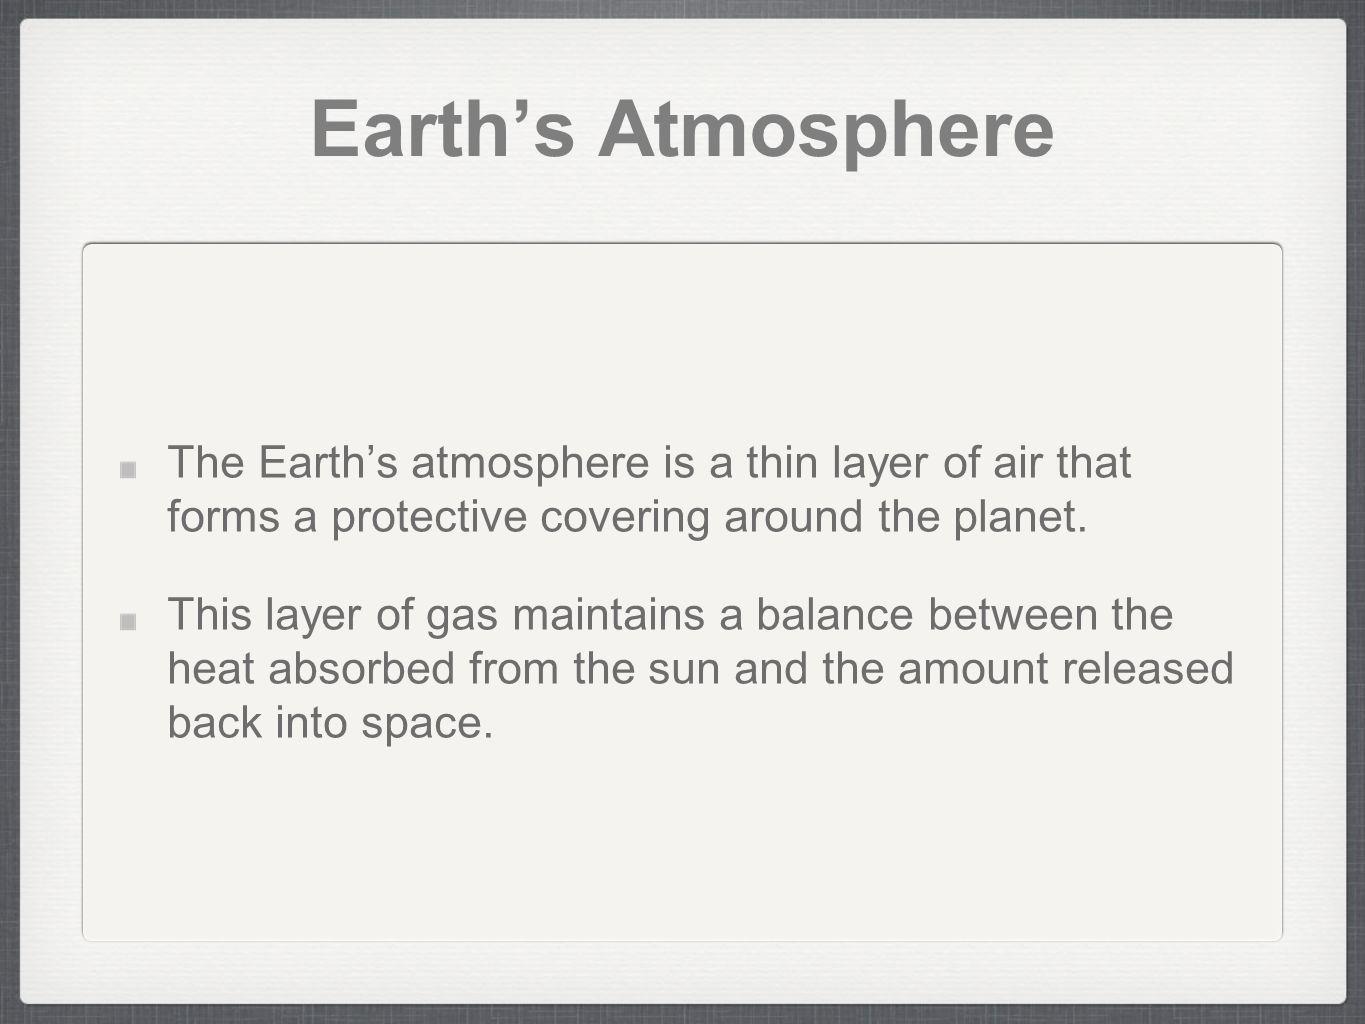 Earth’s Atmosphere The Earth’s atmosphere is a thin layer of air that forms a protective covering around the planet.